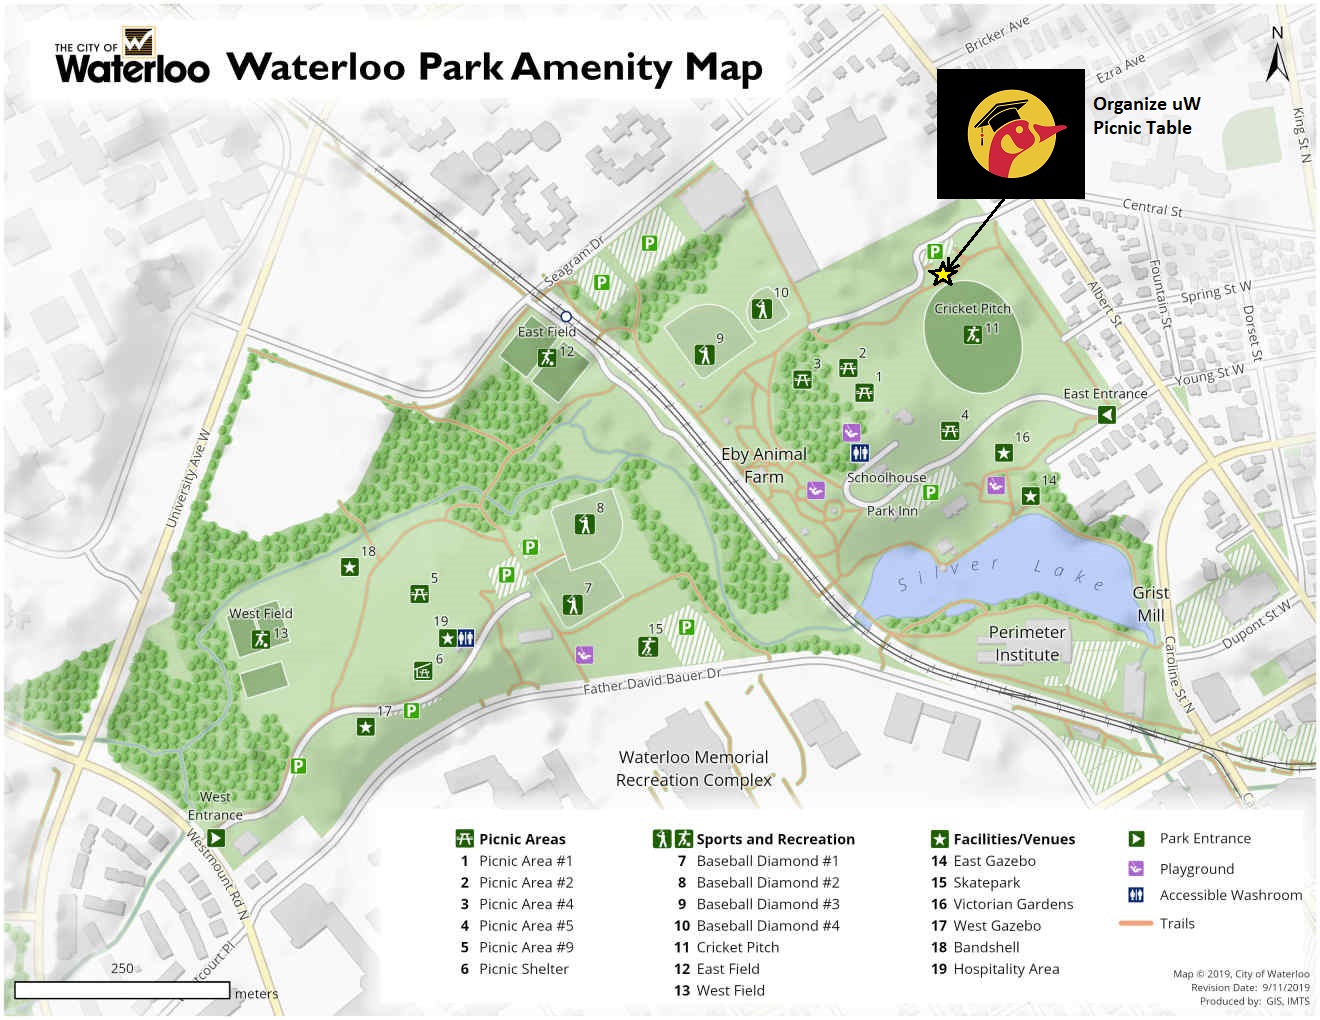 Map of Waterloo park, with arrow pointing to area just north of cricket pitch in the northeast of the park, near a small parking lot. The closest intersection to the entrance is Albert and Central streets.